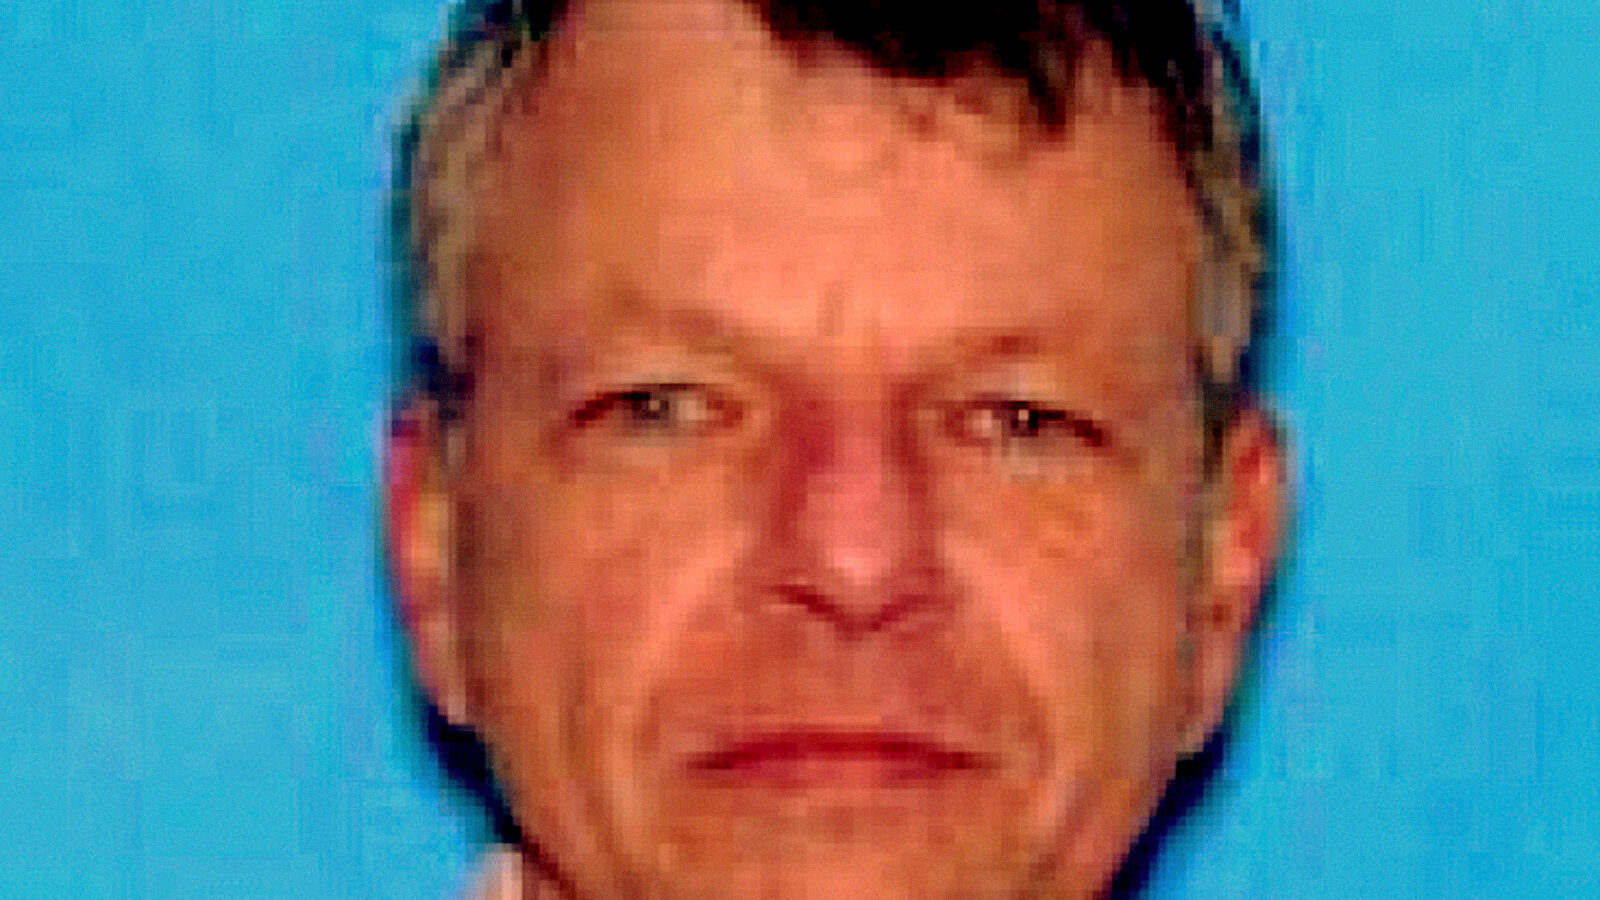 This undated photo provided by the Lafayette Police Department shows John Russel Houser, in Lafayette, La. Authorities have identified Houser as the gunman who opened fire in a movie theater on Thursday, July 23, 2015, in Lafayette.